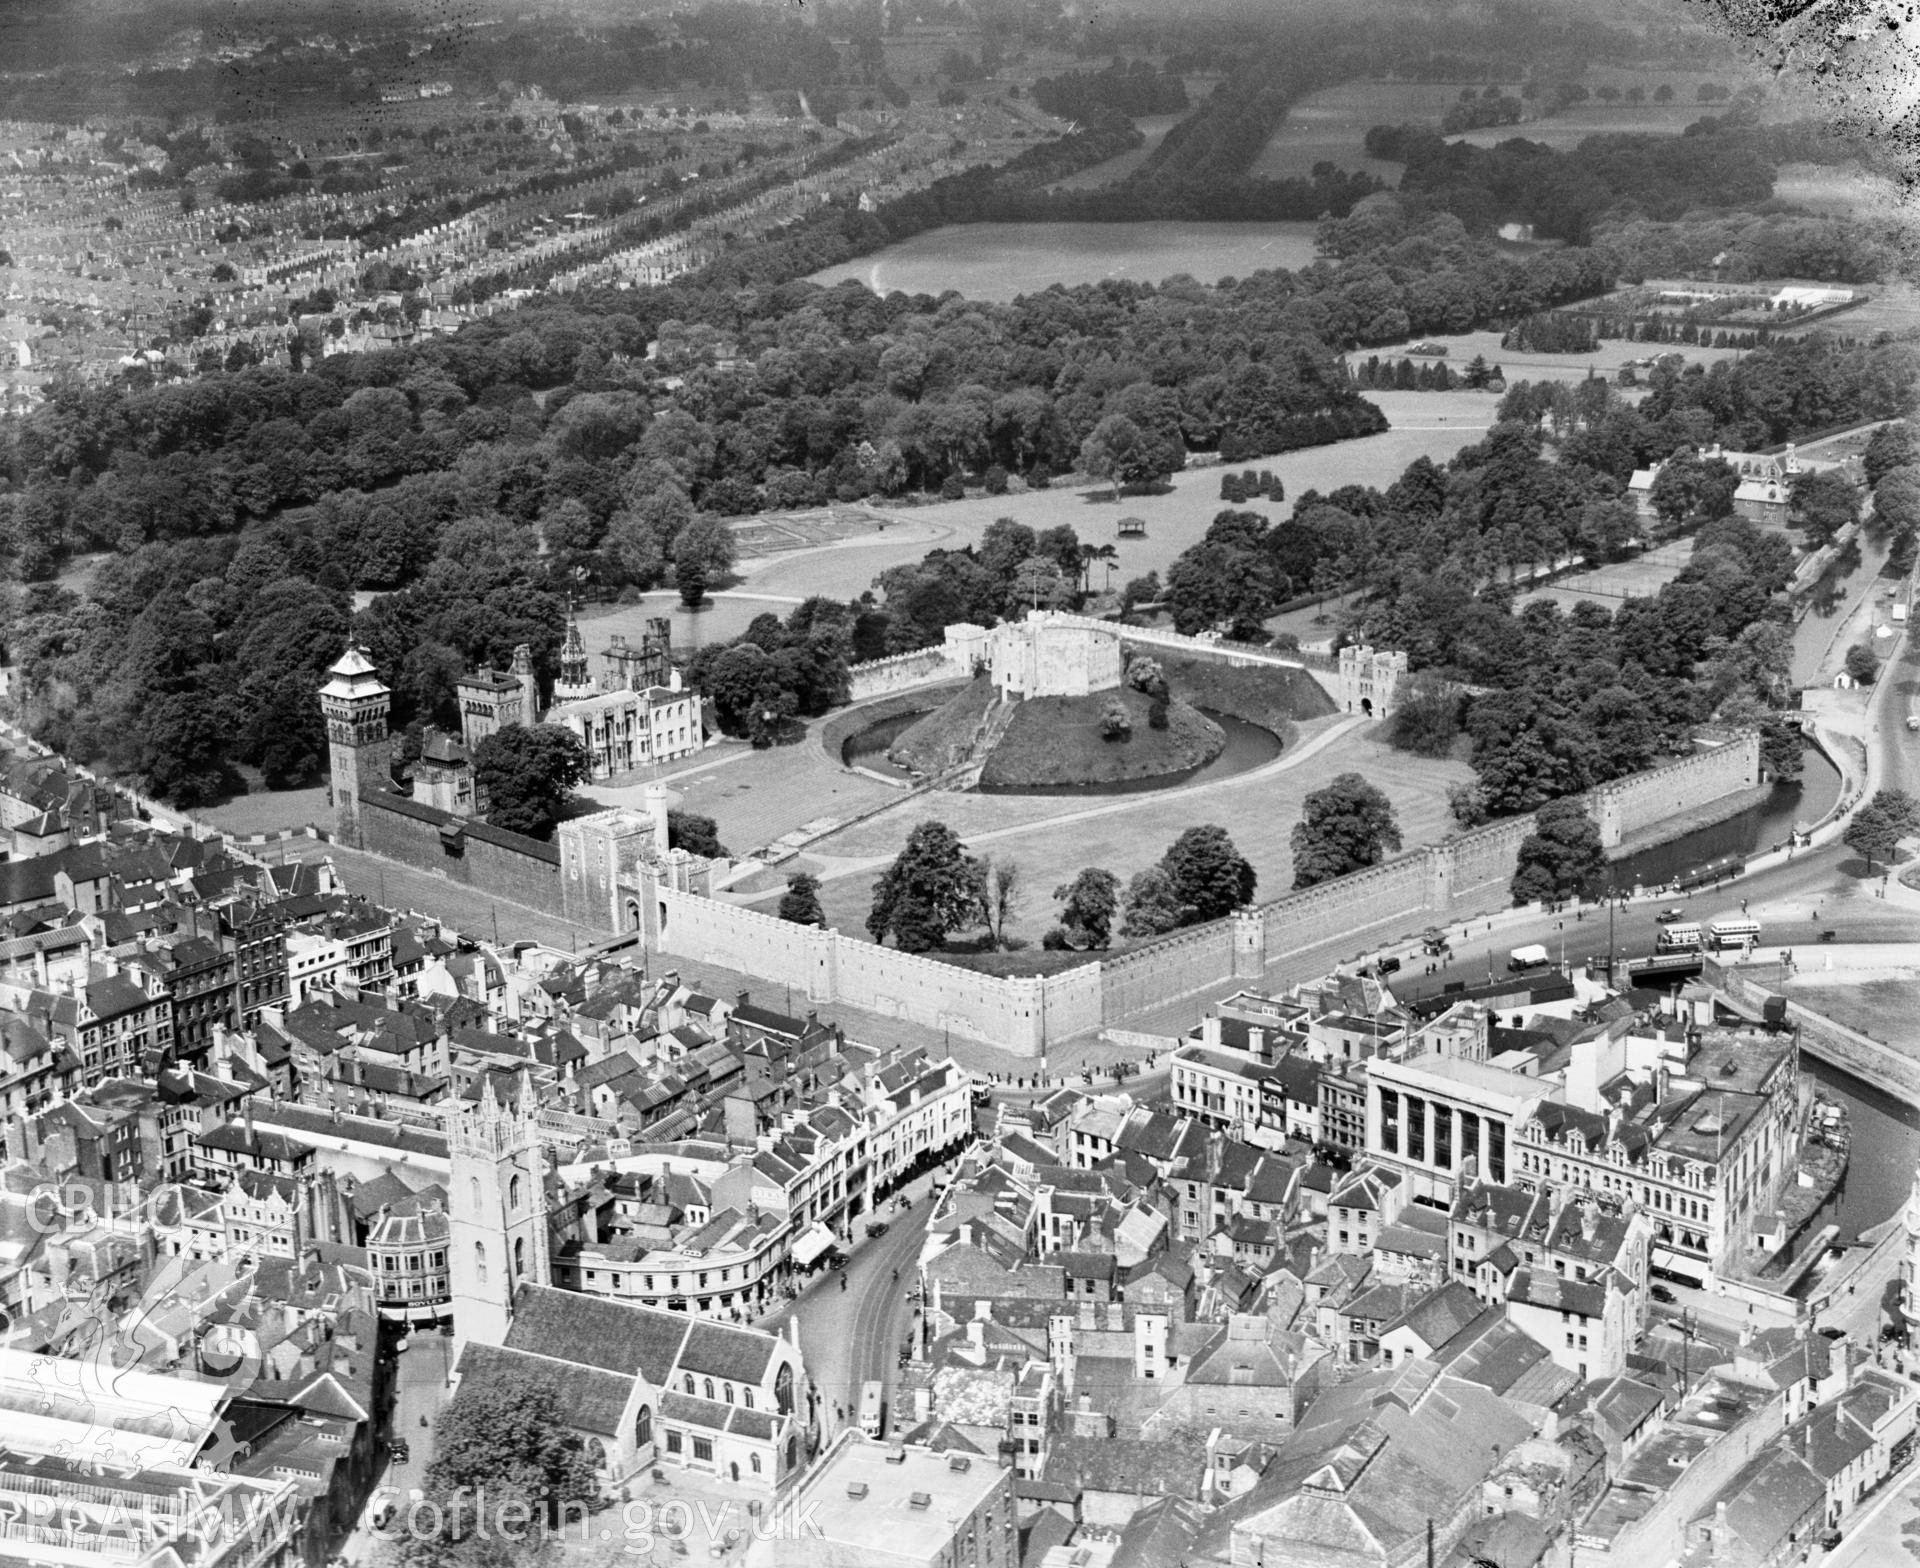 View of Cardiff Castle with St John the Baptist church, oblique aerial view. 5?x4? black and white glass plate negative.